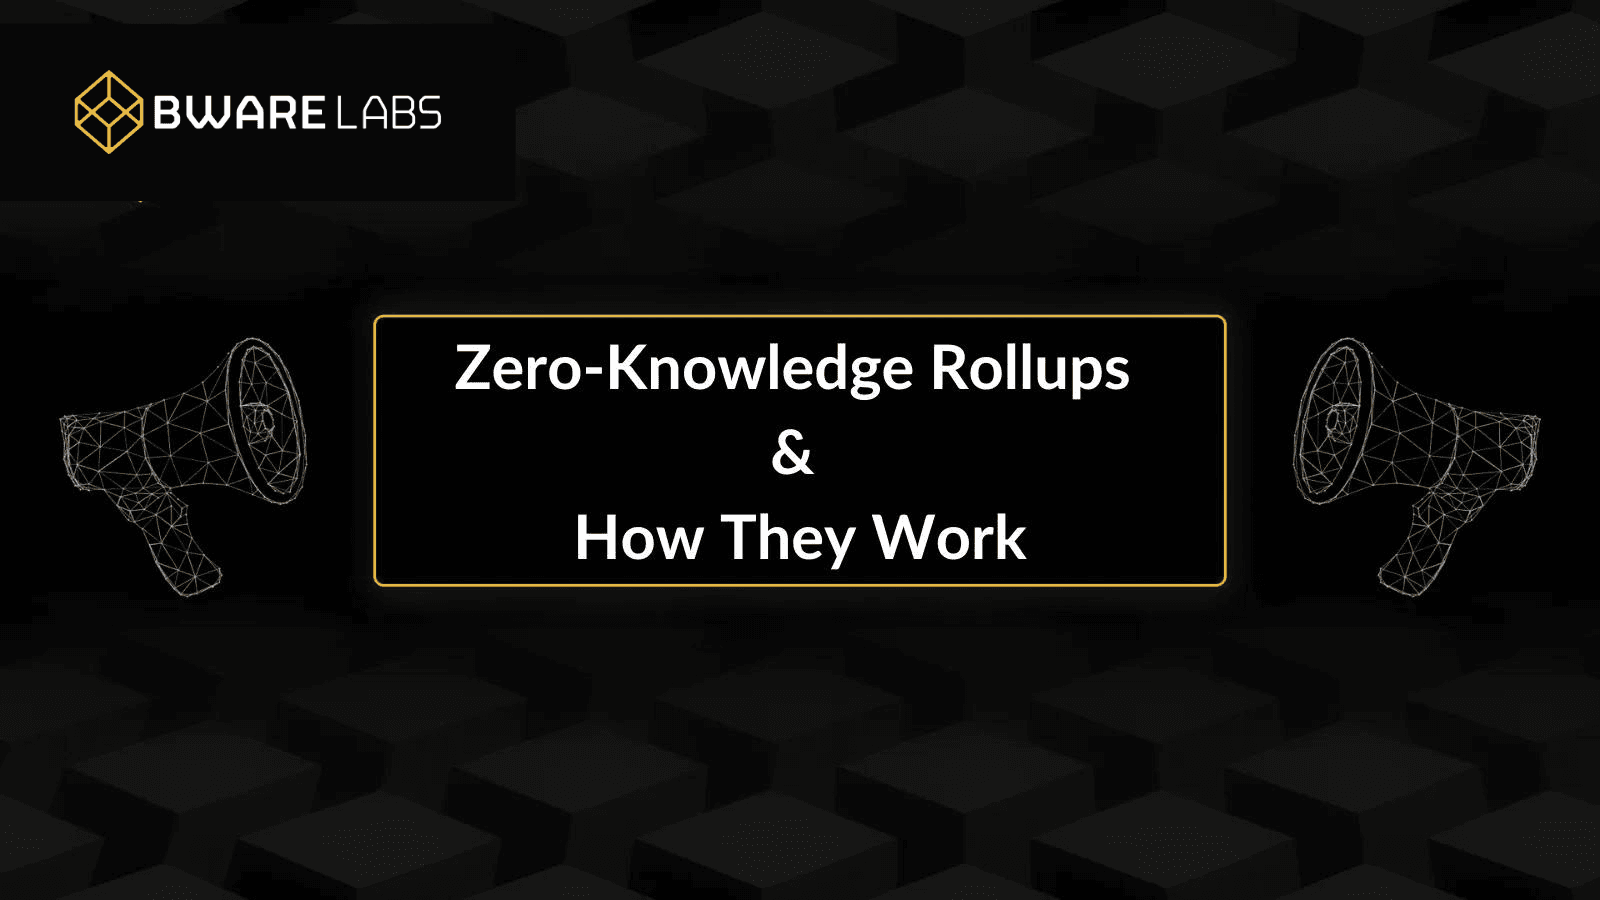 What Are Zero-Knowledge Rollups and How Do They Work?